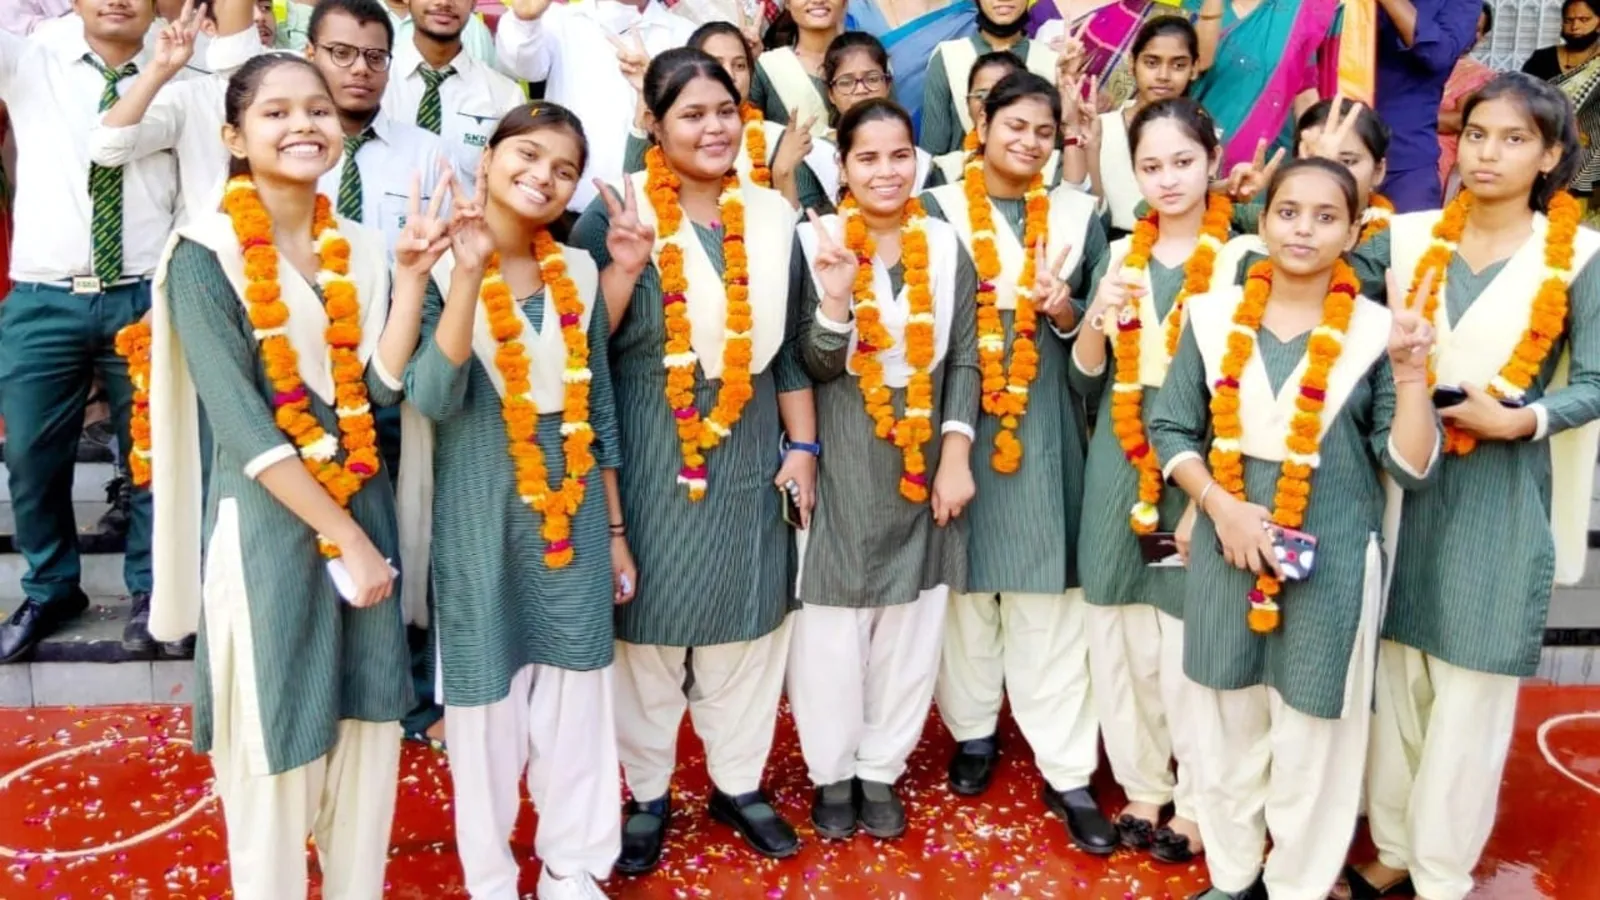 UP Board class 10th Toppers List: Prince Patel Tops class 10 examination